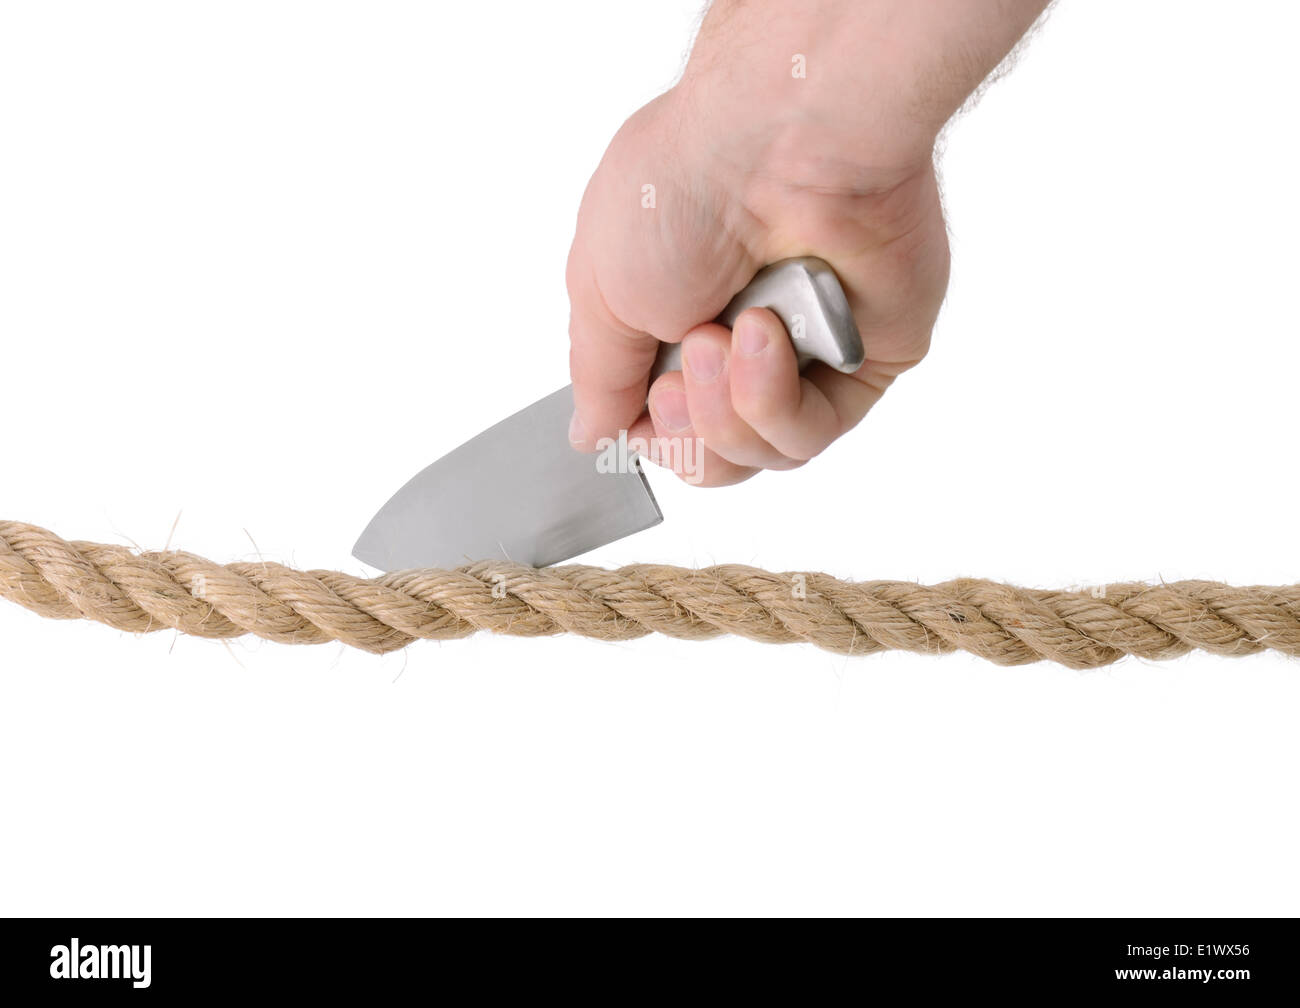 knife cutting rope isolated on a white background Stock Photo